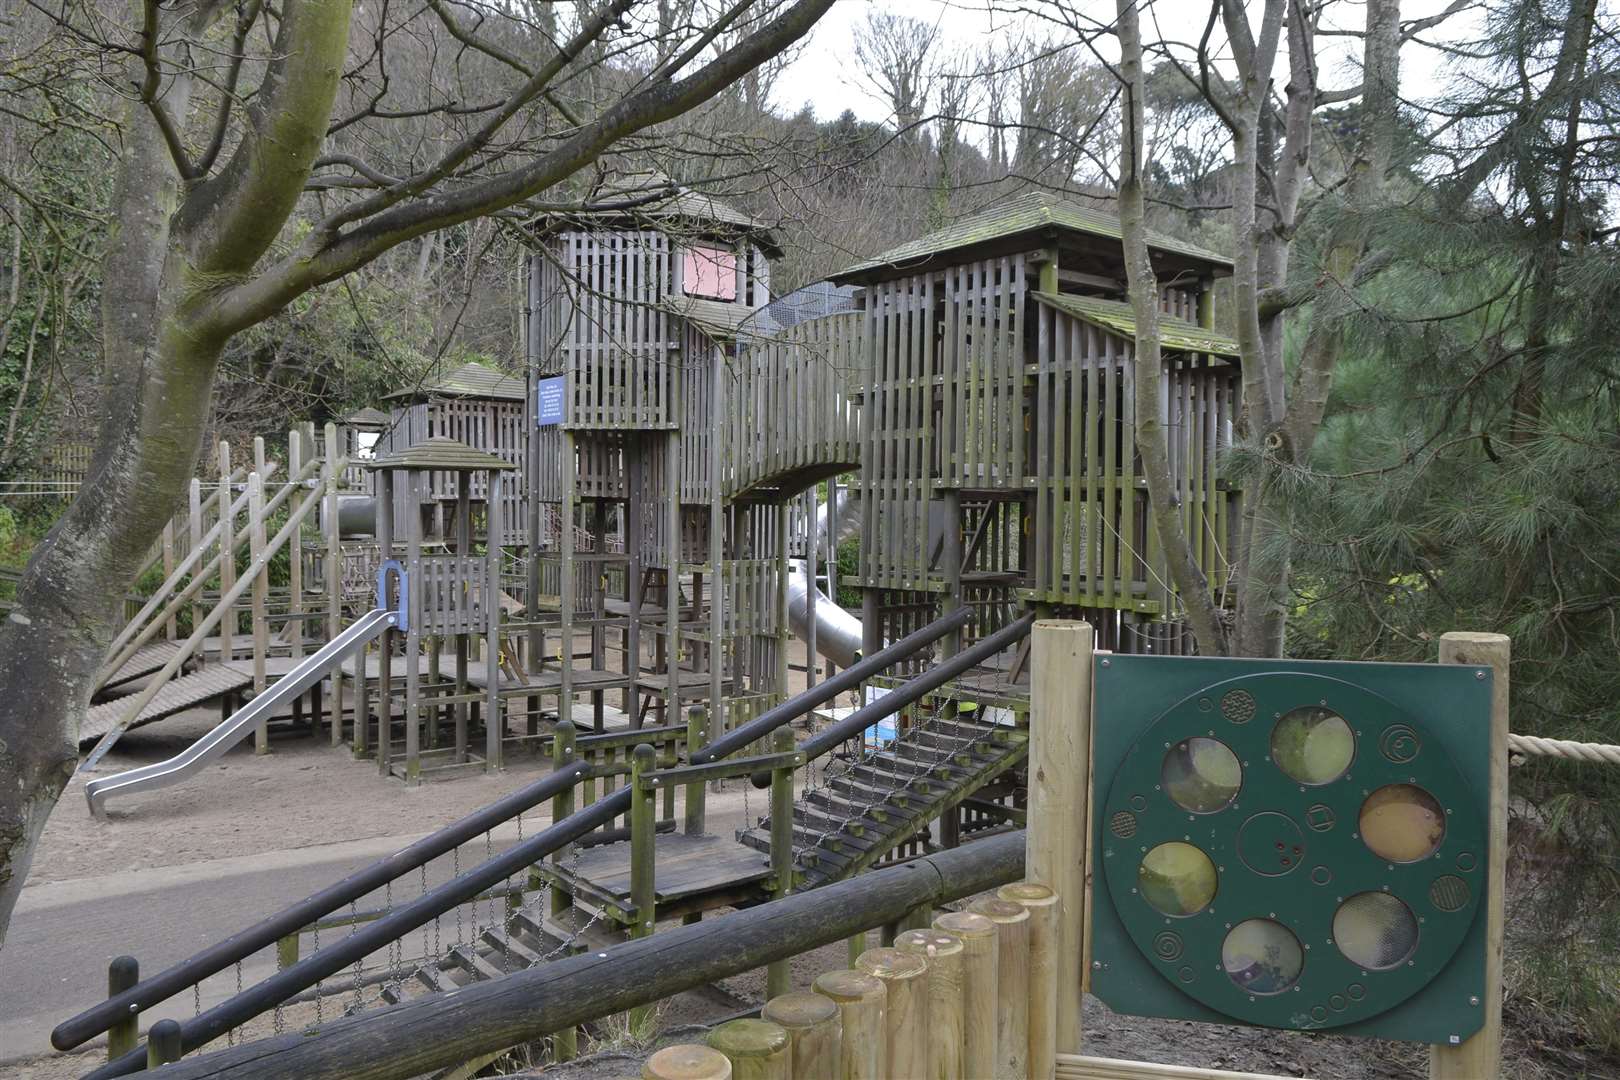 The play area at the Lower Leas Coastal Park